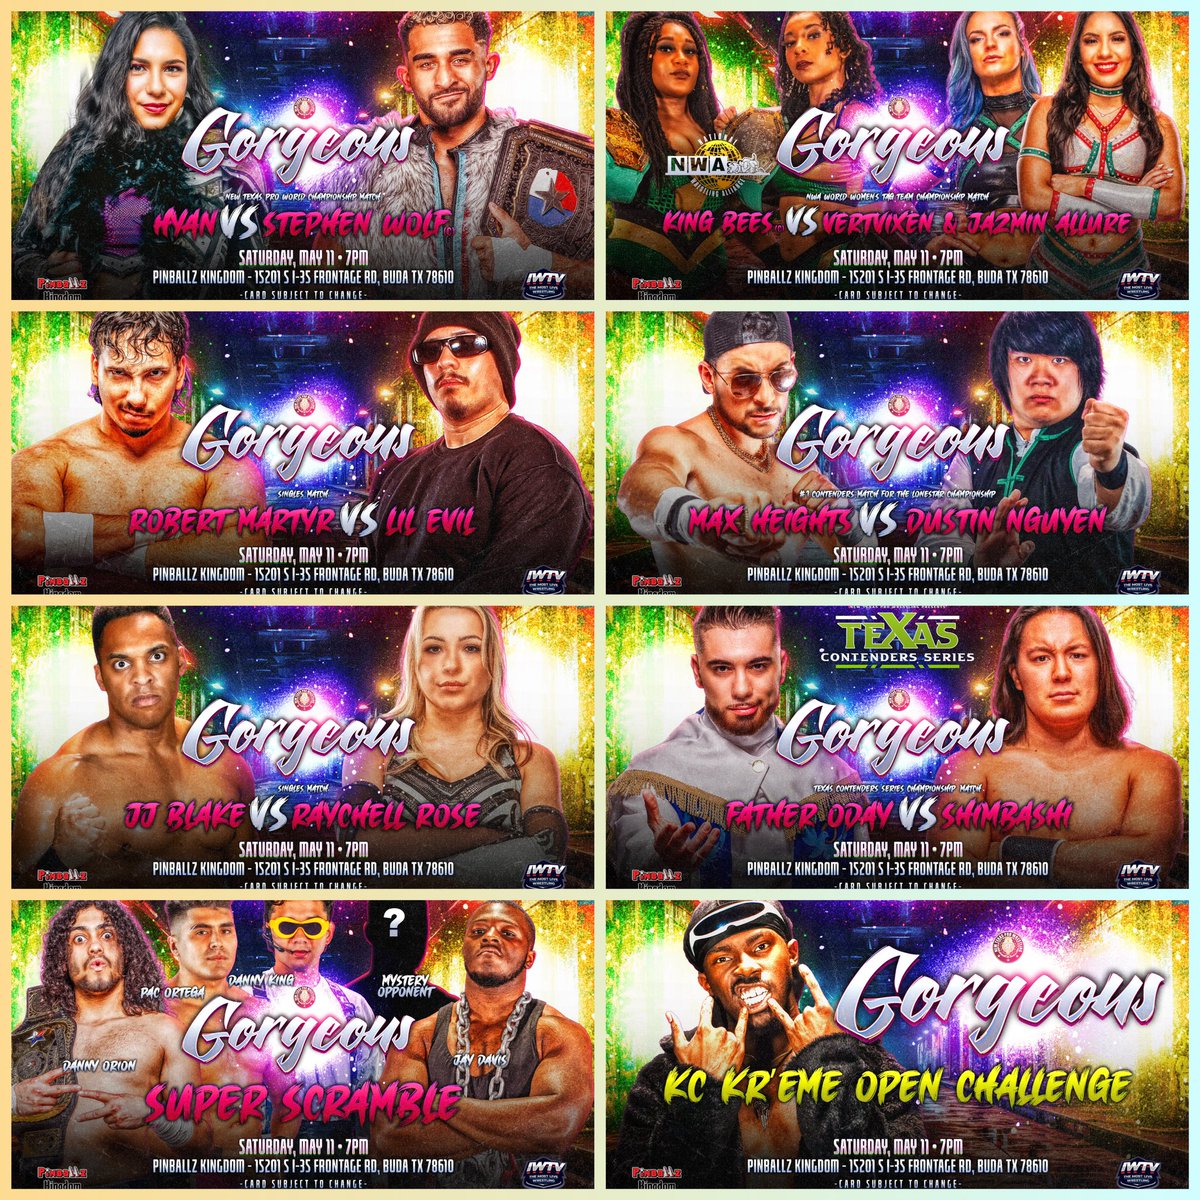 ❗️TODAY IS THE DAY❗️ Hyan/Wolf King Bees/Tier One Martyr/Evil Max/Dustin JJ/Rose Oday/Shimbashi Super Scramble KC Kr’eme Open Challenge +more surprises #Gorgeous • 5/11 • 7PM @pinballzaustin • Buda, TX Only 6 Seated GA Seats Remain! 🎟️: NewTexasPro.Com/Events